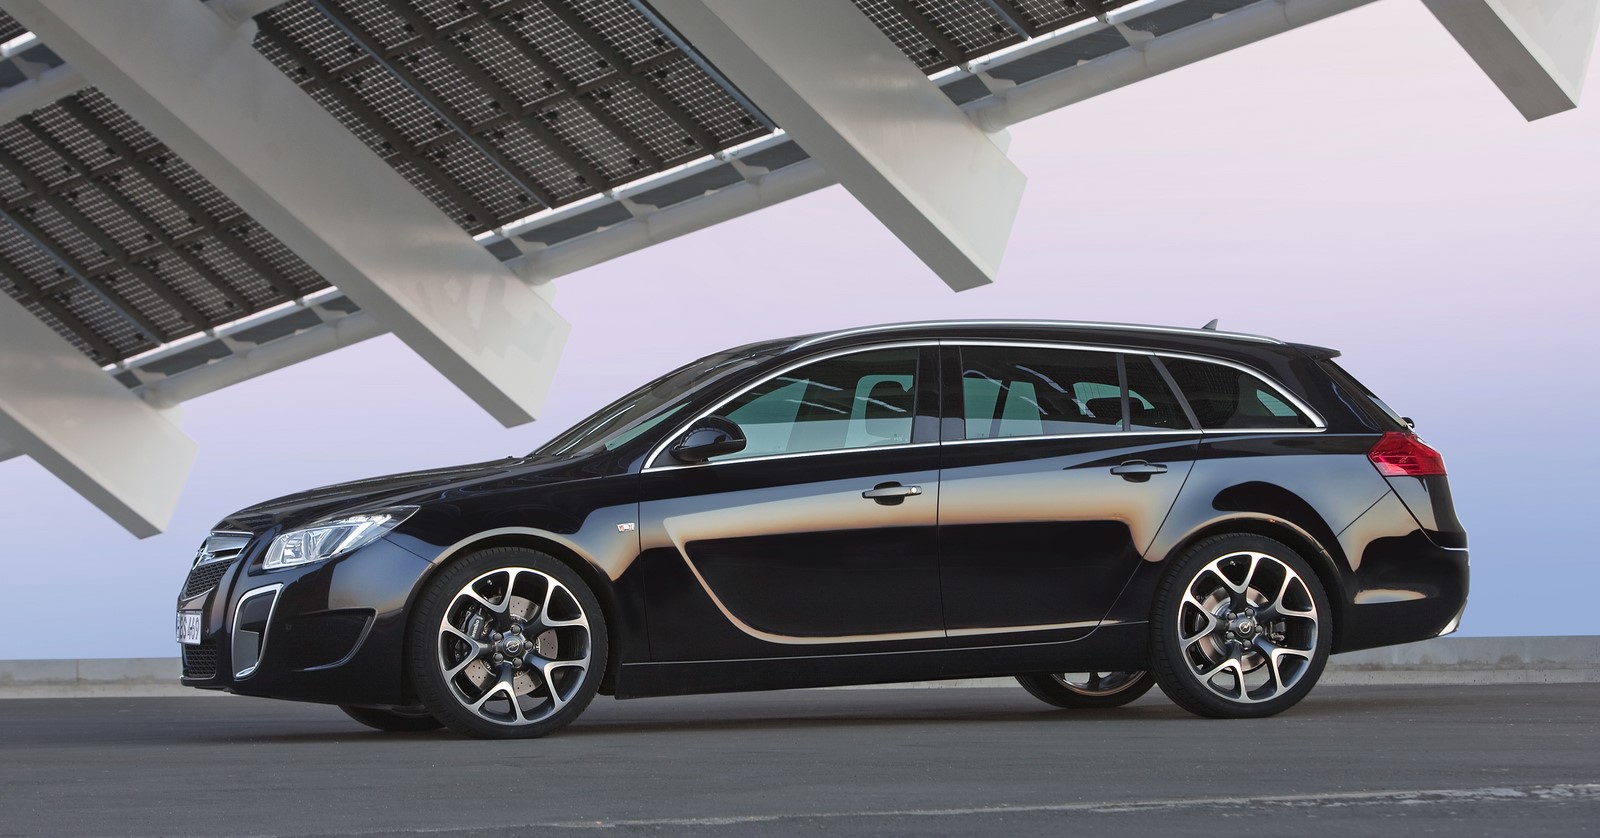 Amazing 2014 Opel Insignia OPC Sports Tourer Pictures & Backgrounds